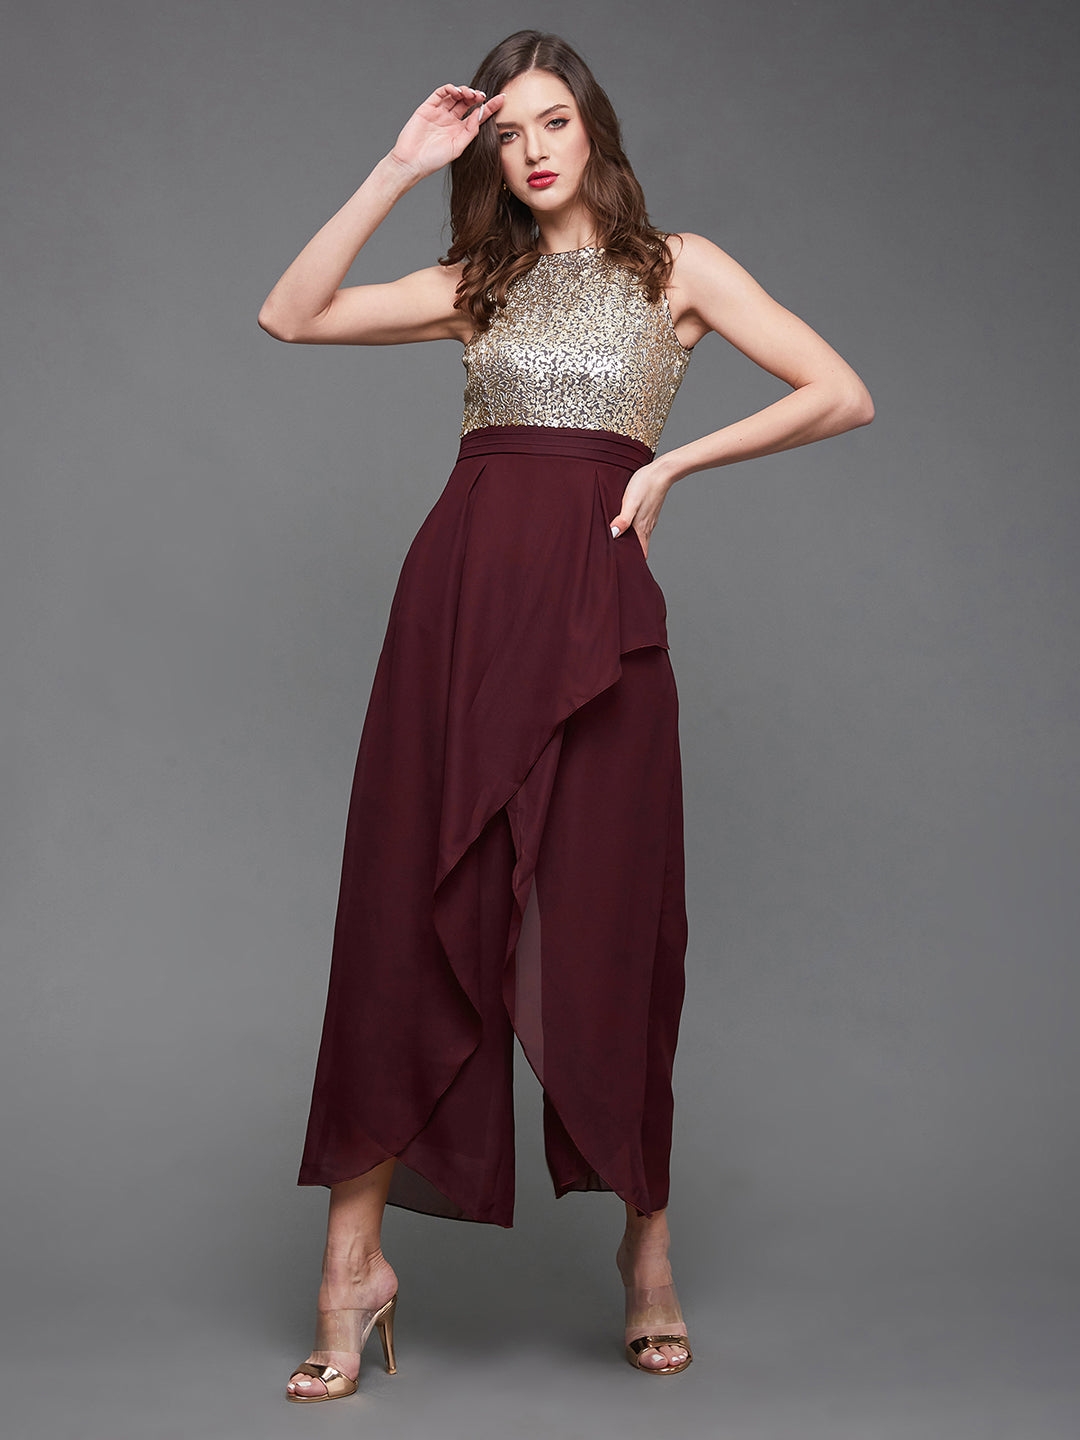 Wine Solid Relaxed Fit Round Neck Sleeveless Regular Length Jumpsuit